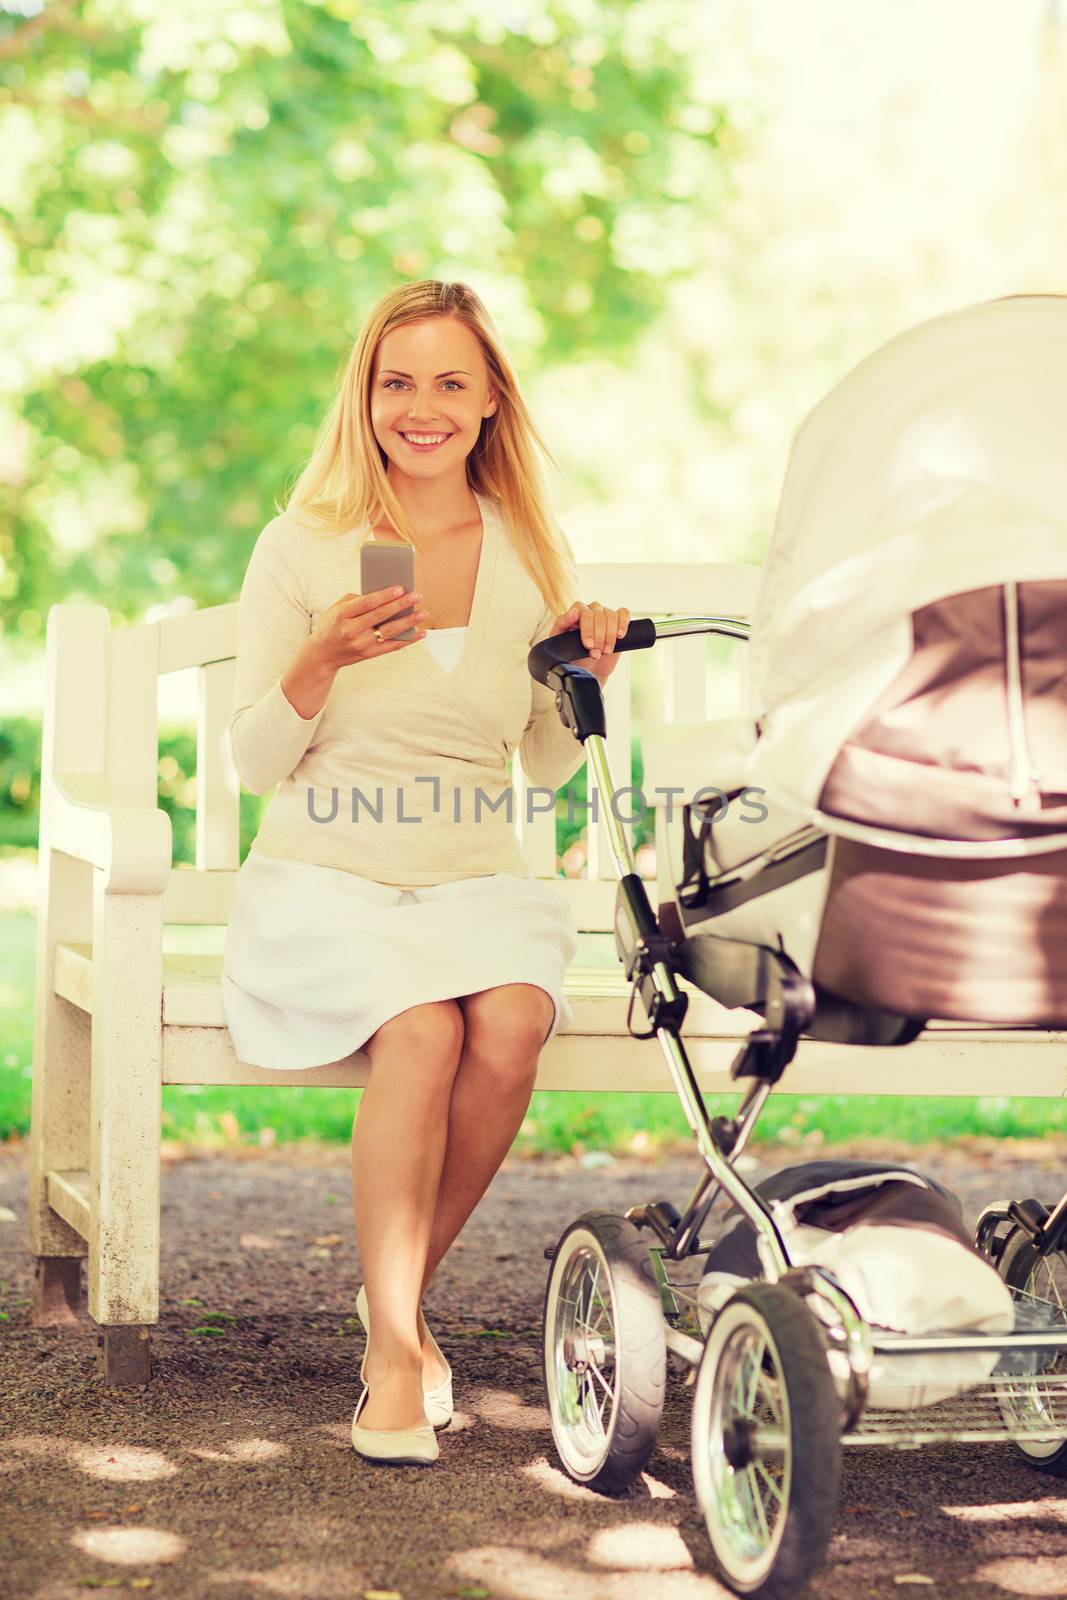 family, parenthood, technology and people concept - happy mother with with smartphone and baby stroller in park